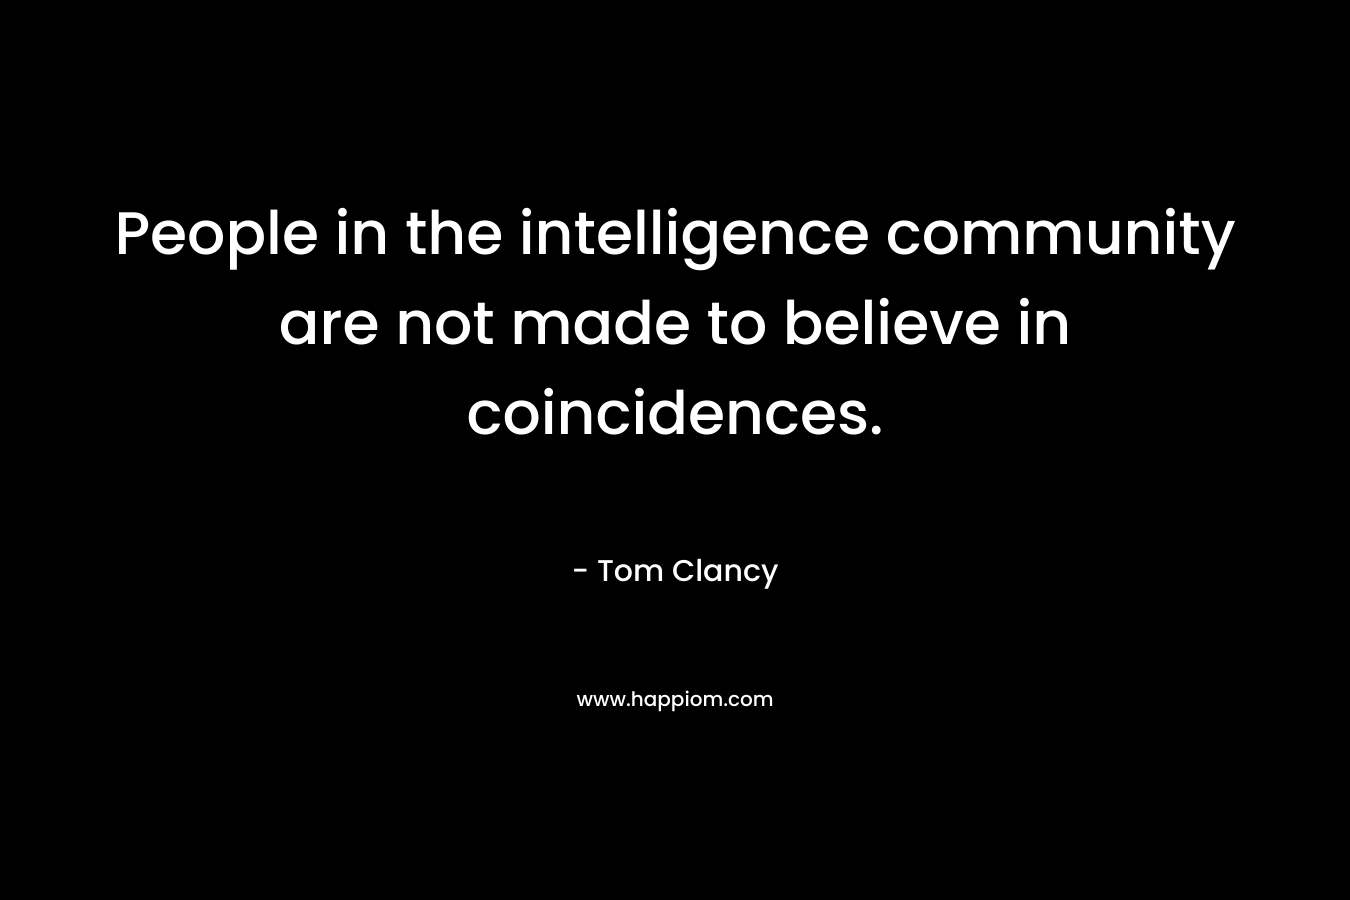 People in the intelligence community are not made to believe in coincidences. – Tom Clancy